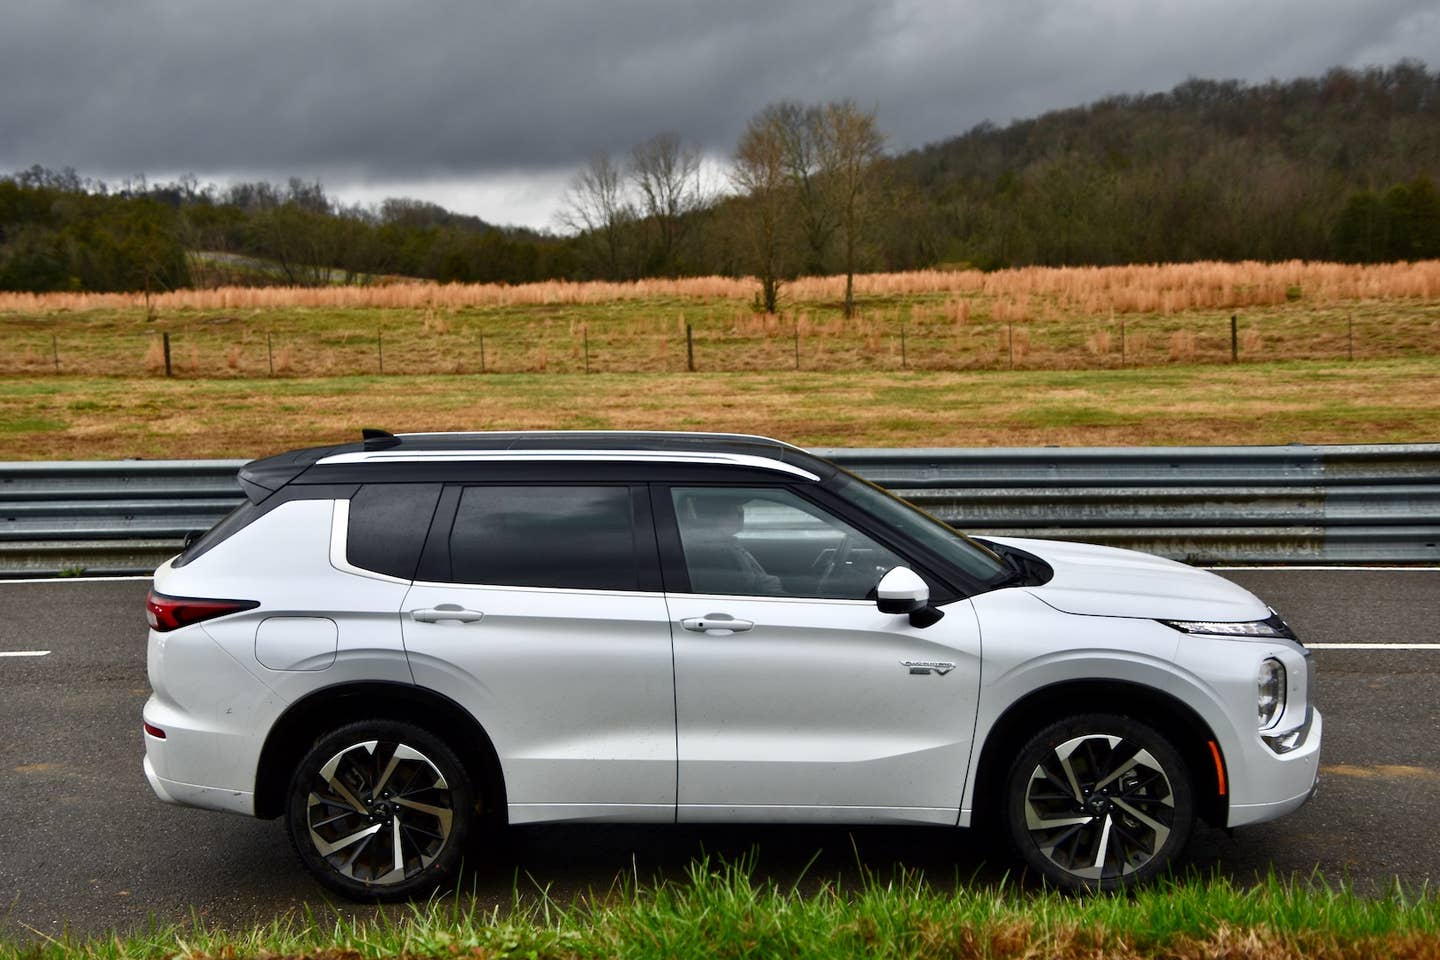 2023 Mitsubishi Outlander PHEV First Drive Review: An Offbeat but Capable  SUV